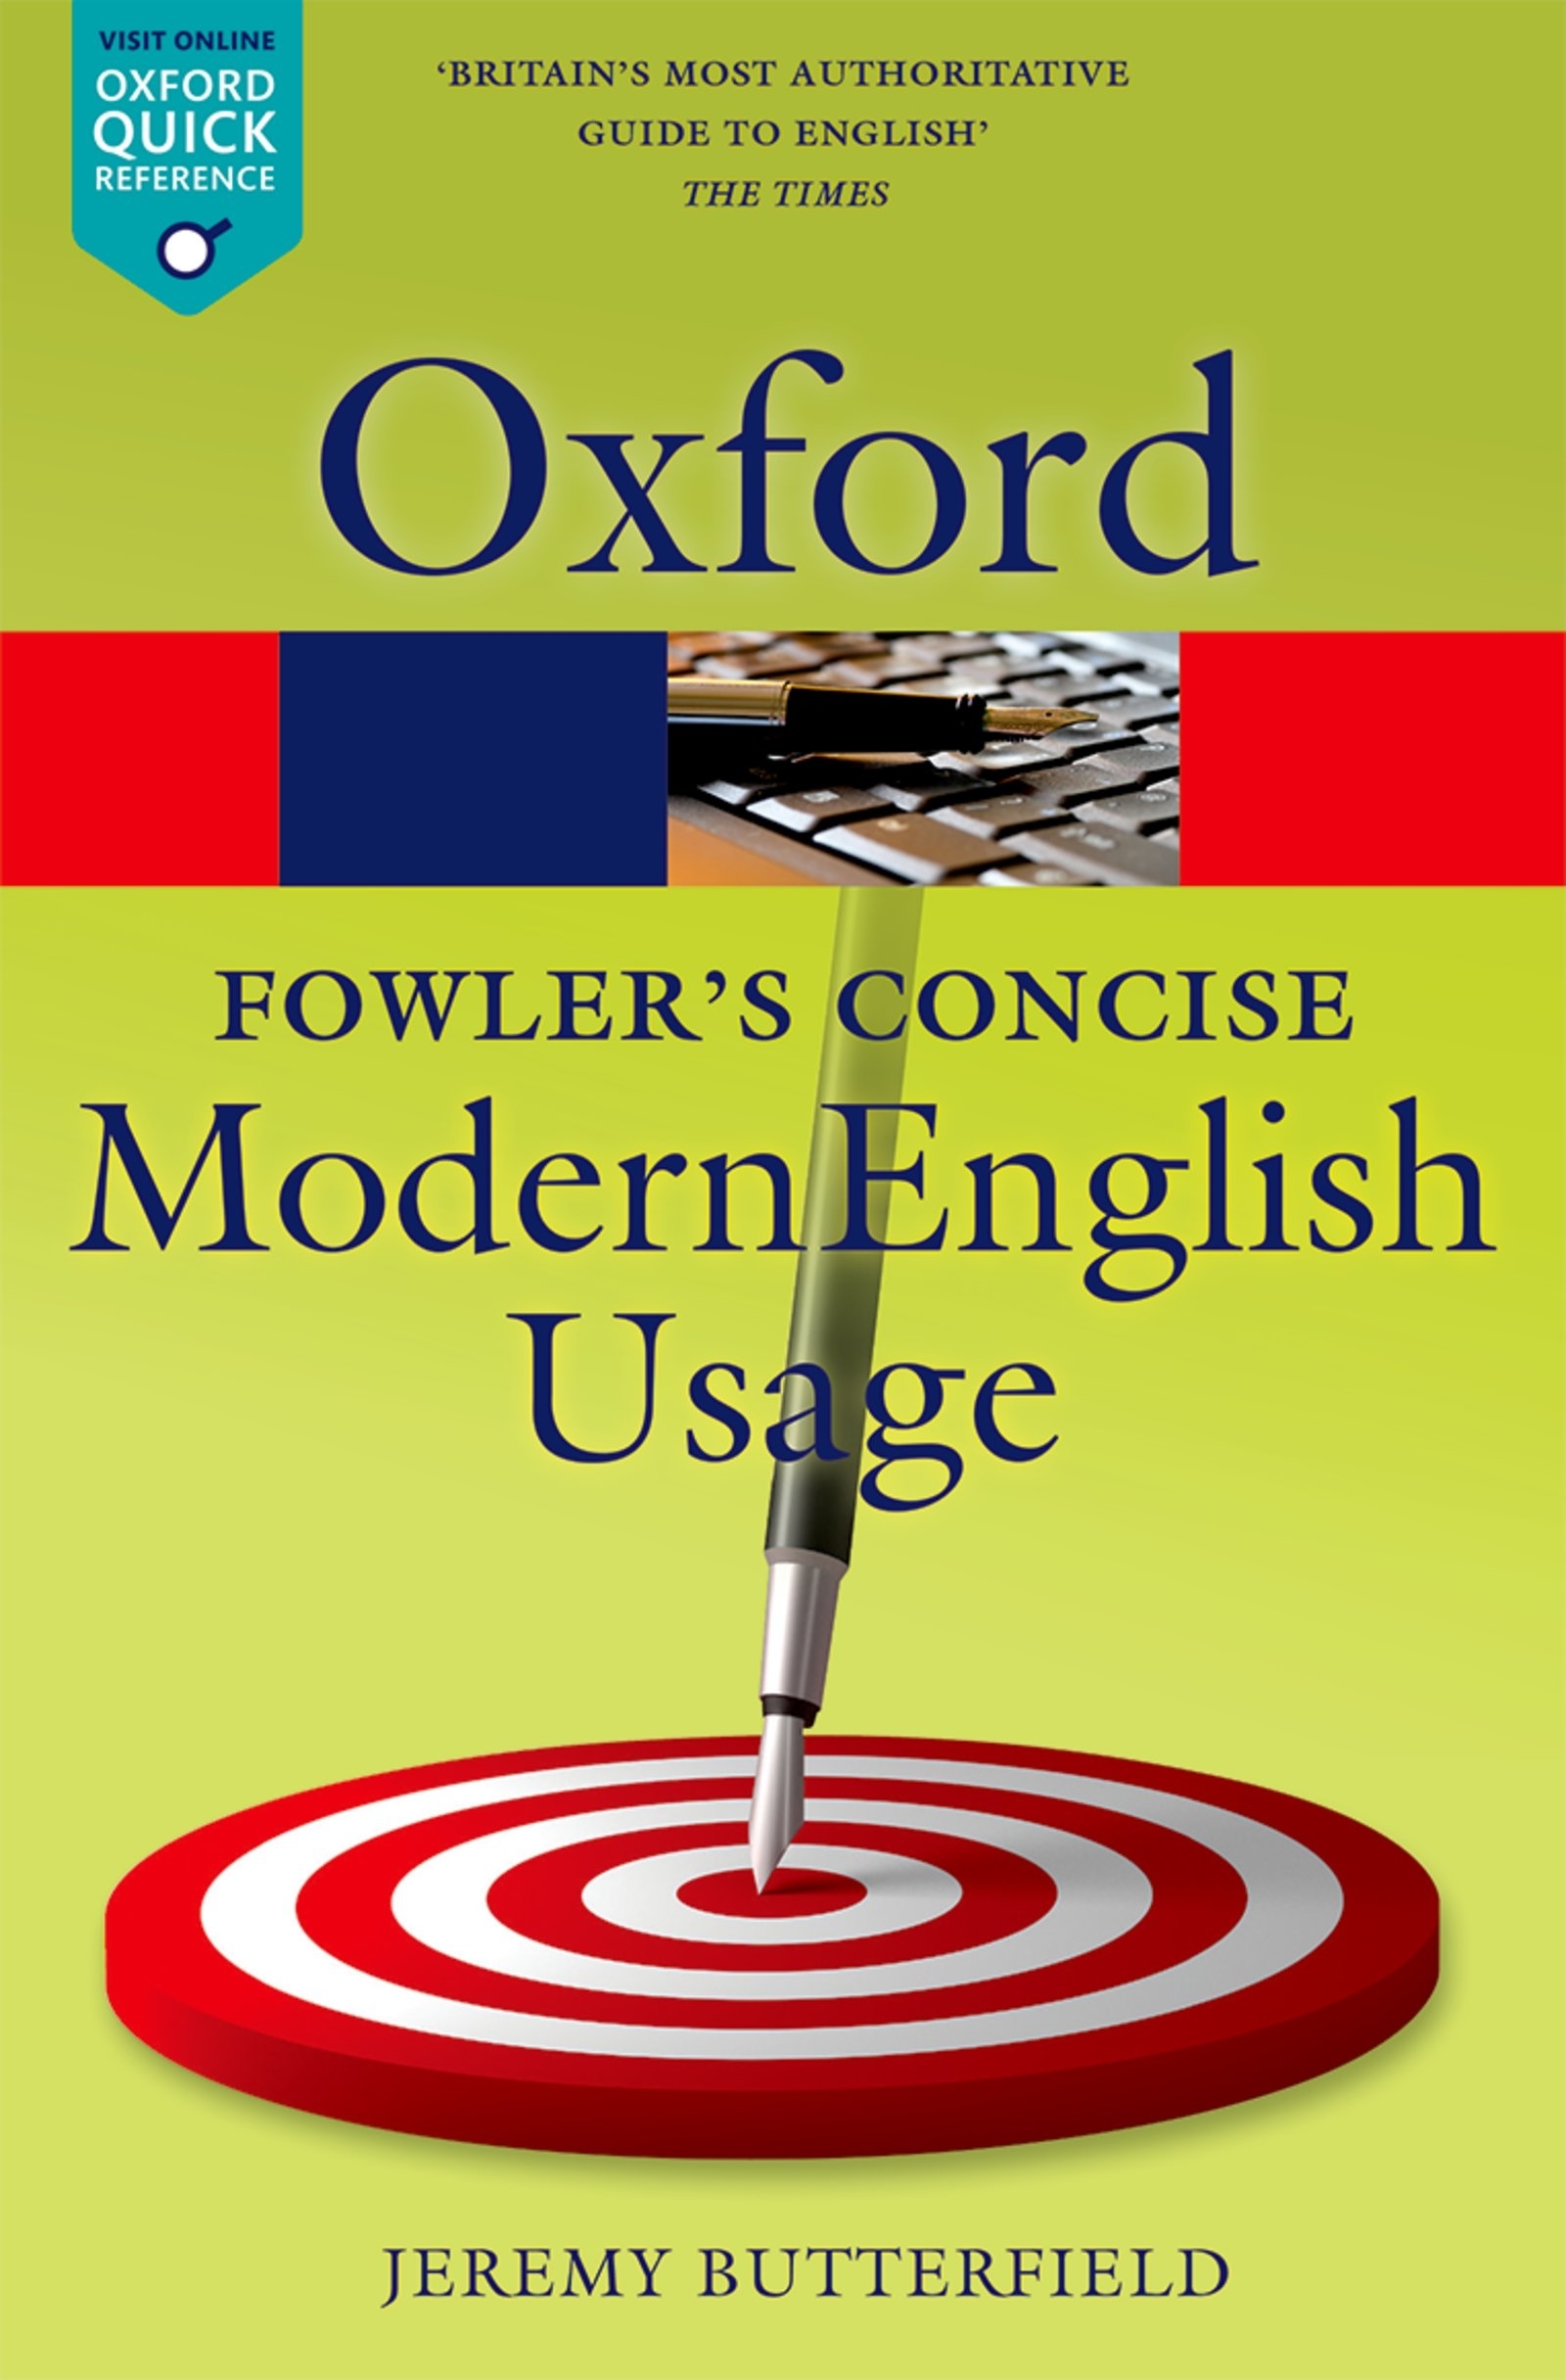 How to search for terms in Fowlers Concise Dictionary of Modern English Usage - photo 1